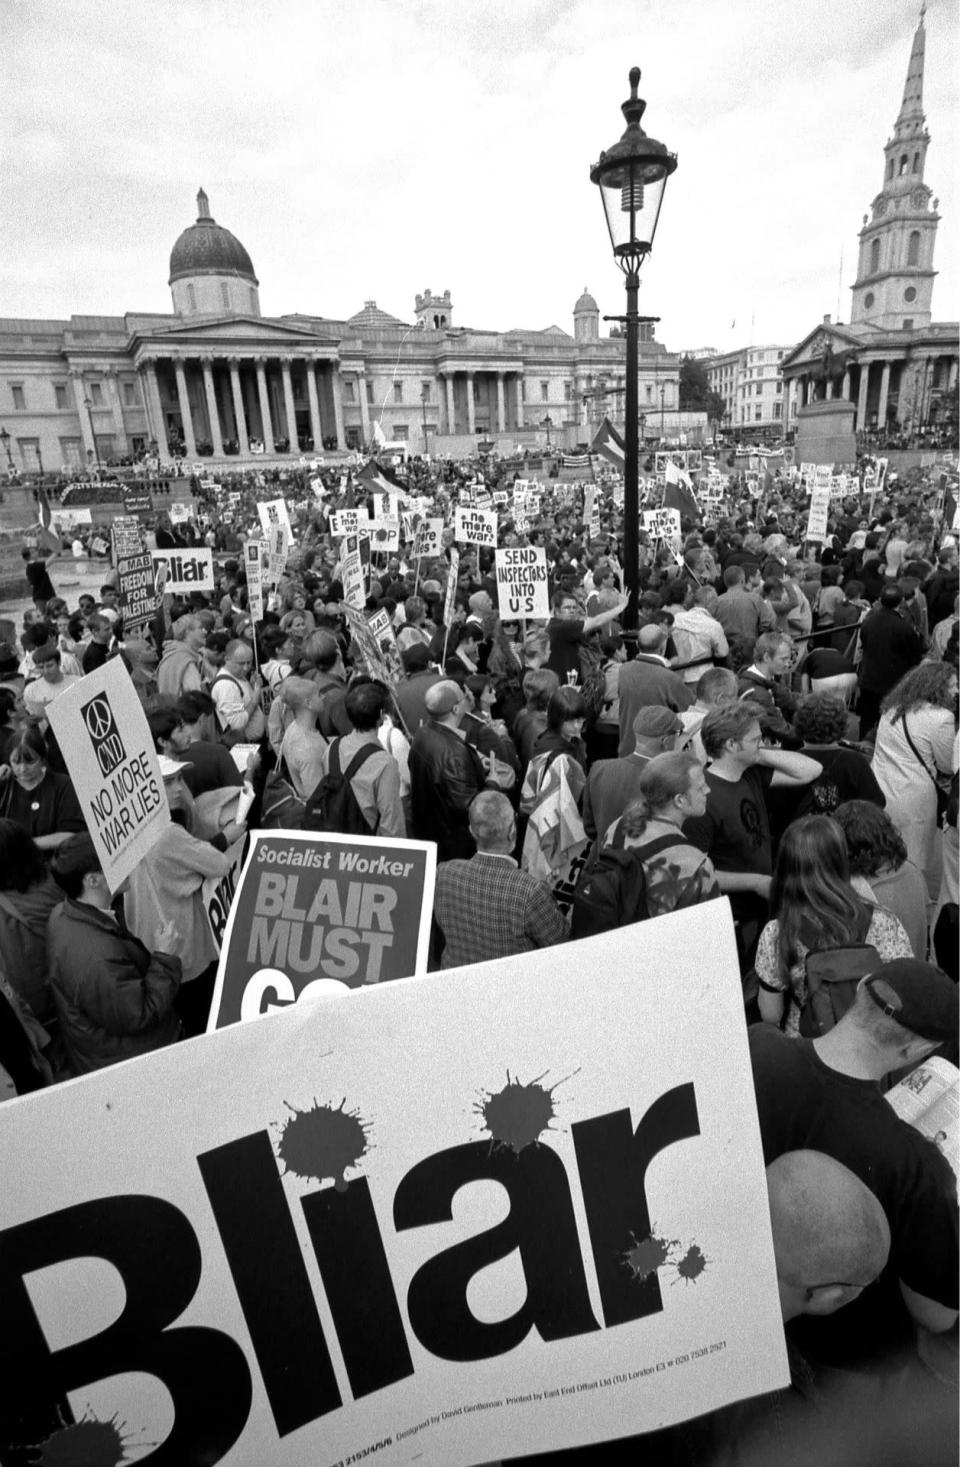 Two million people marched in central London to prevent the attack on Iraq